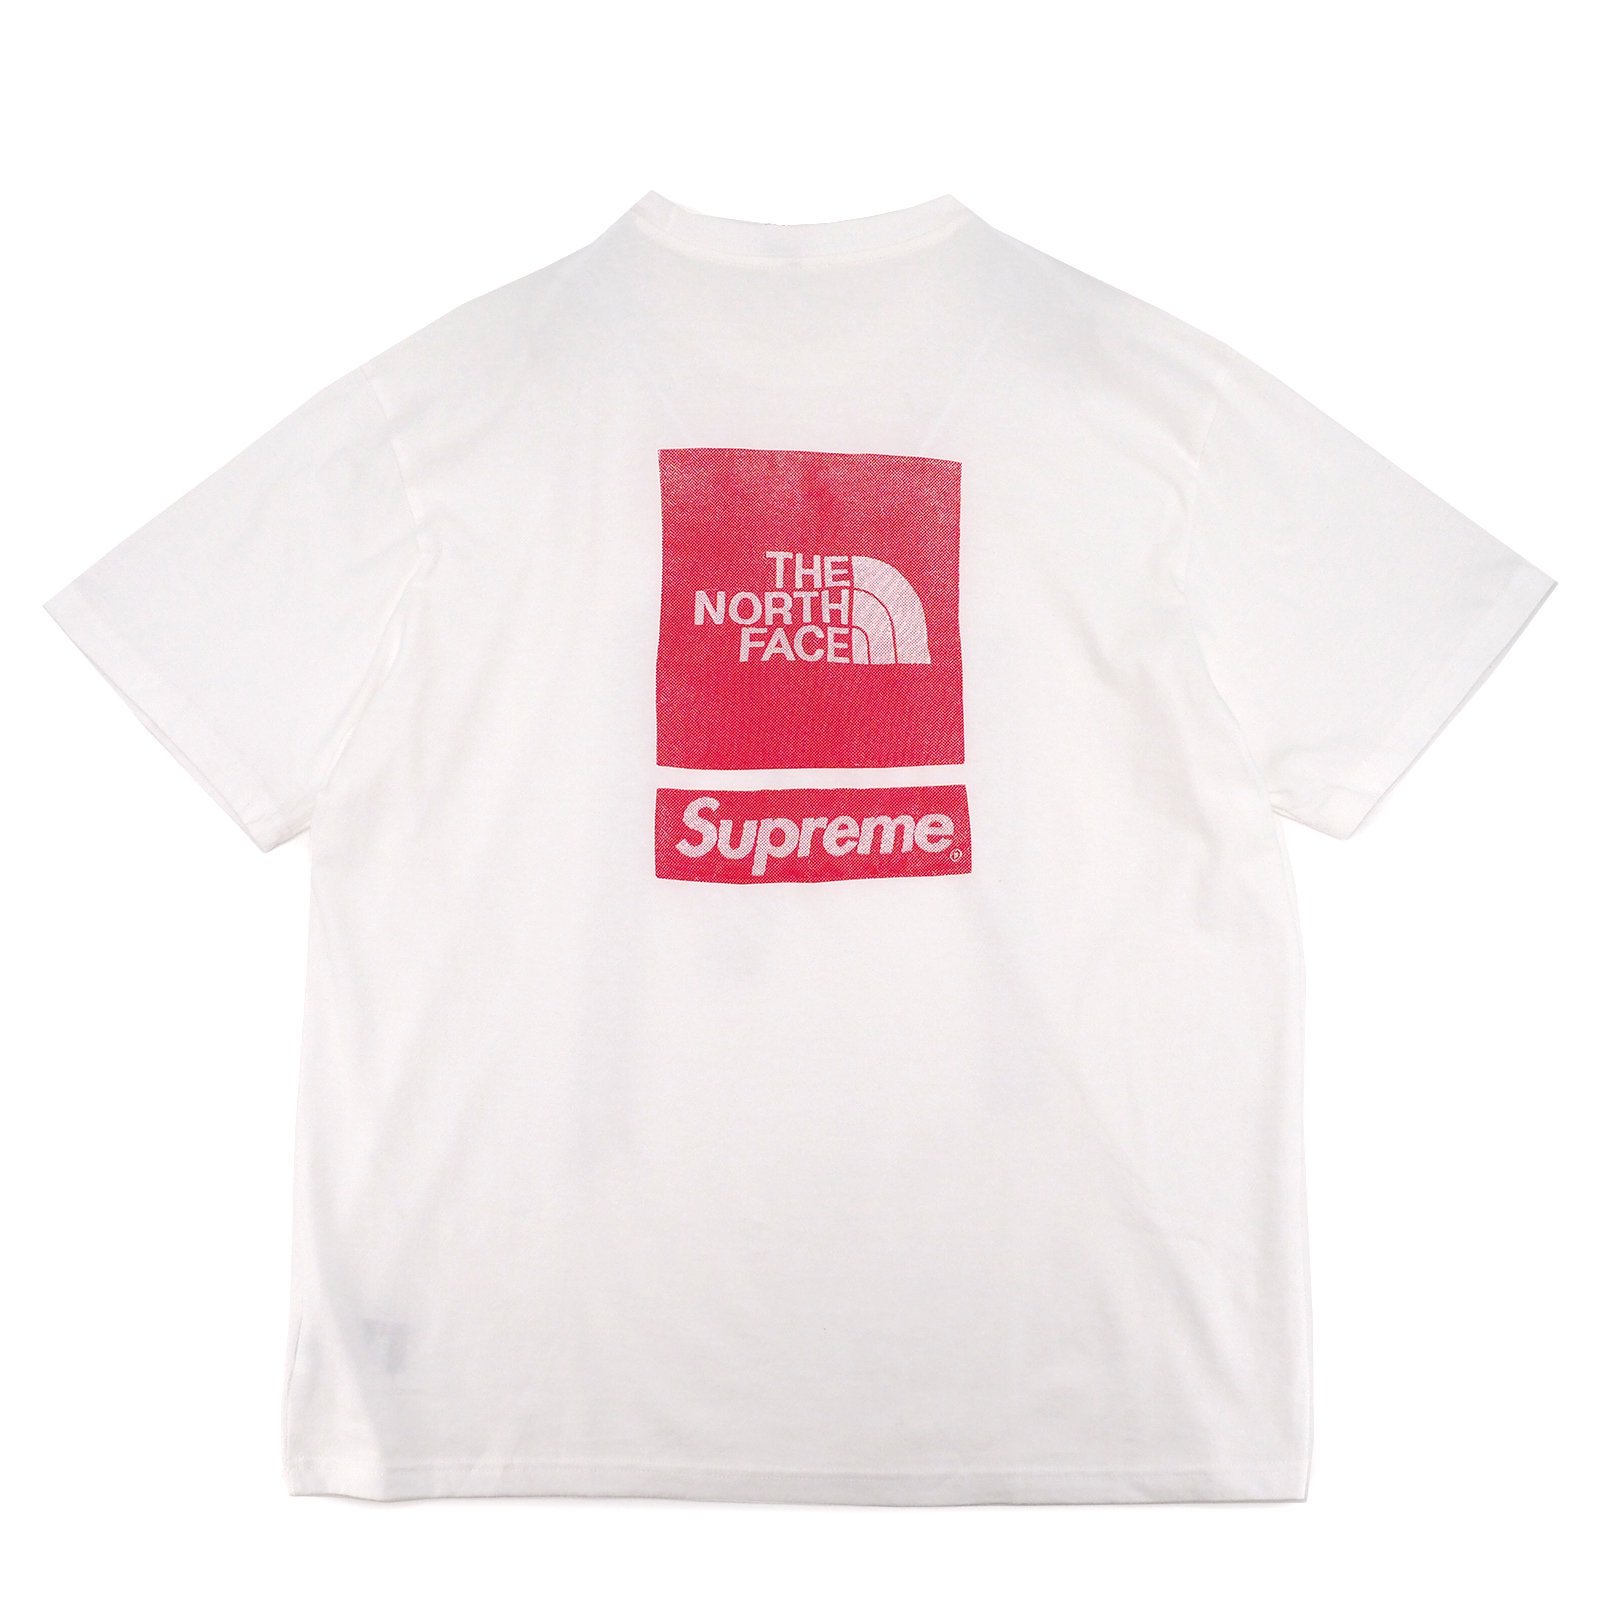 Supreme/The North Face S/S Top | 24SS スプリットモデルのコラボT ...